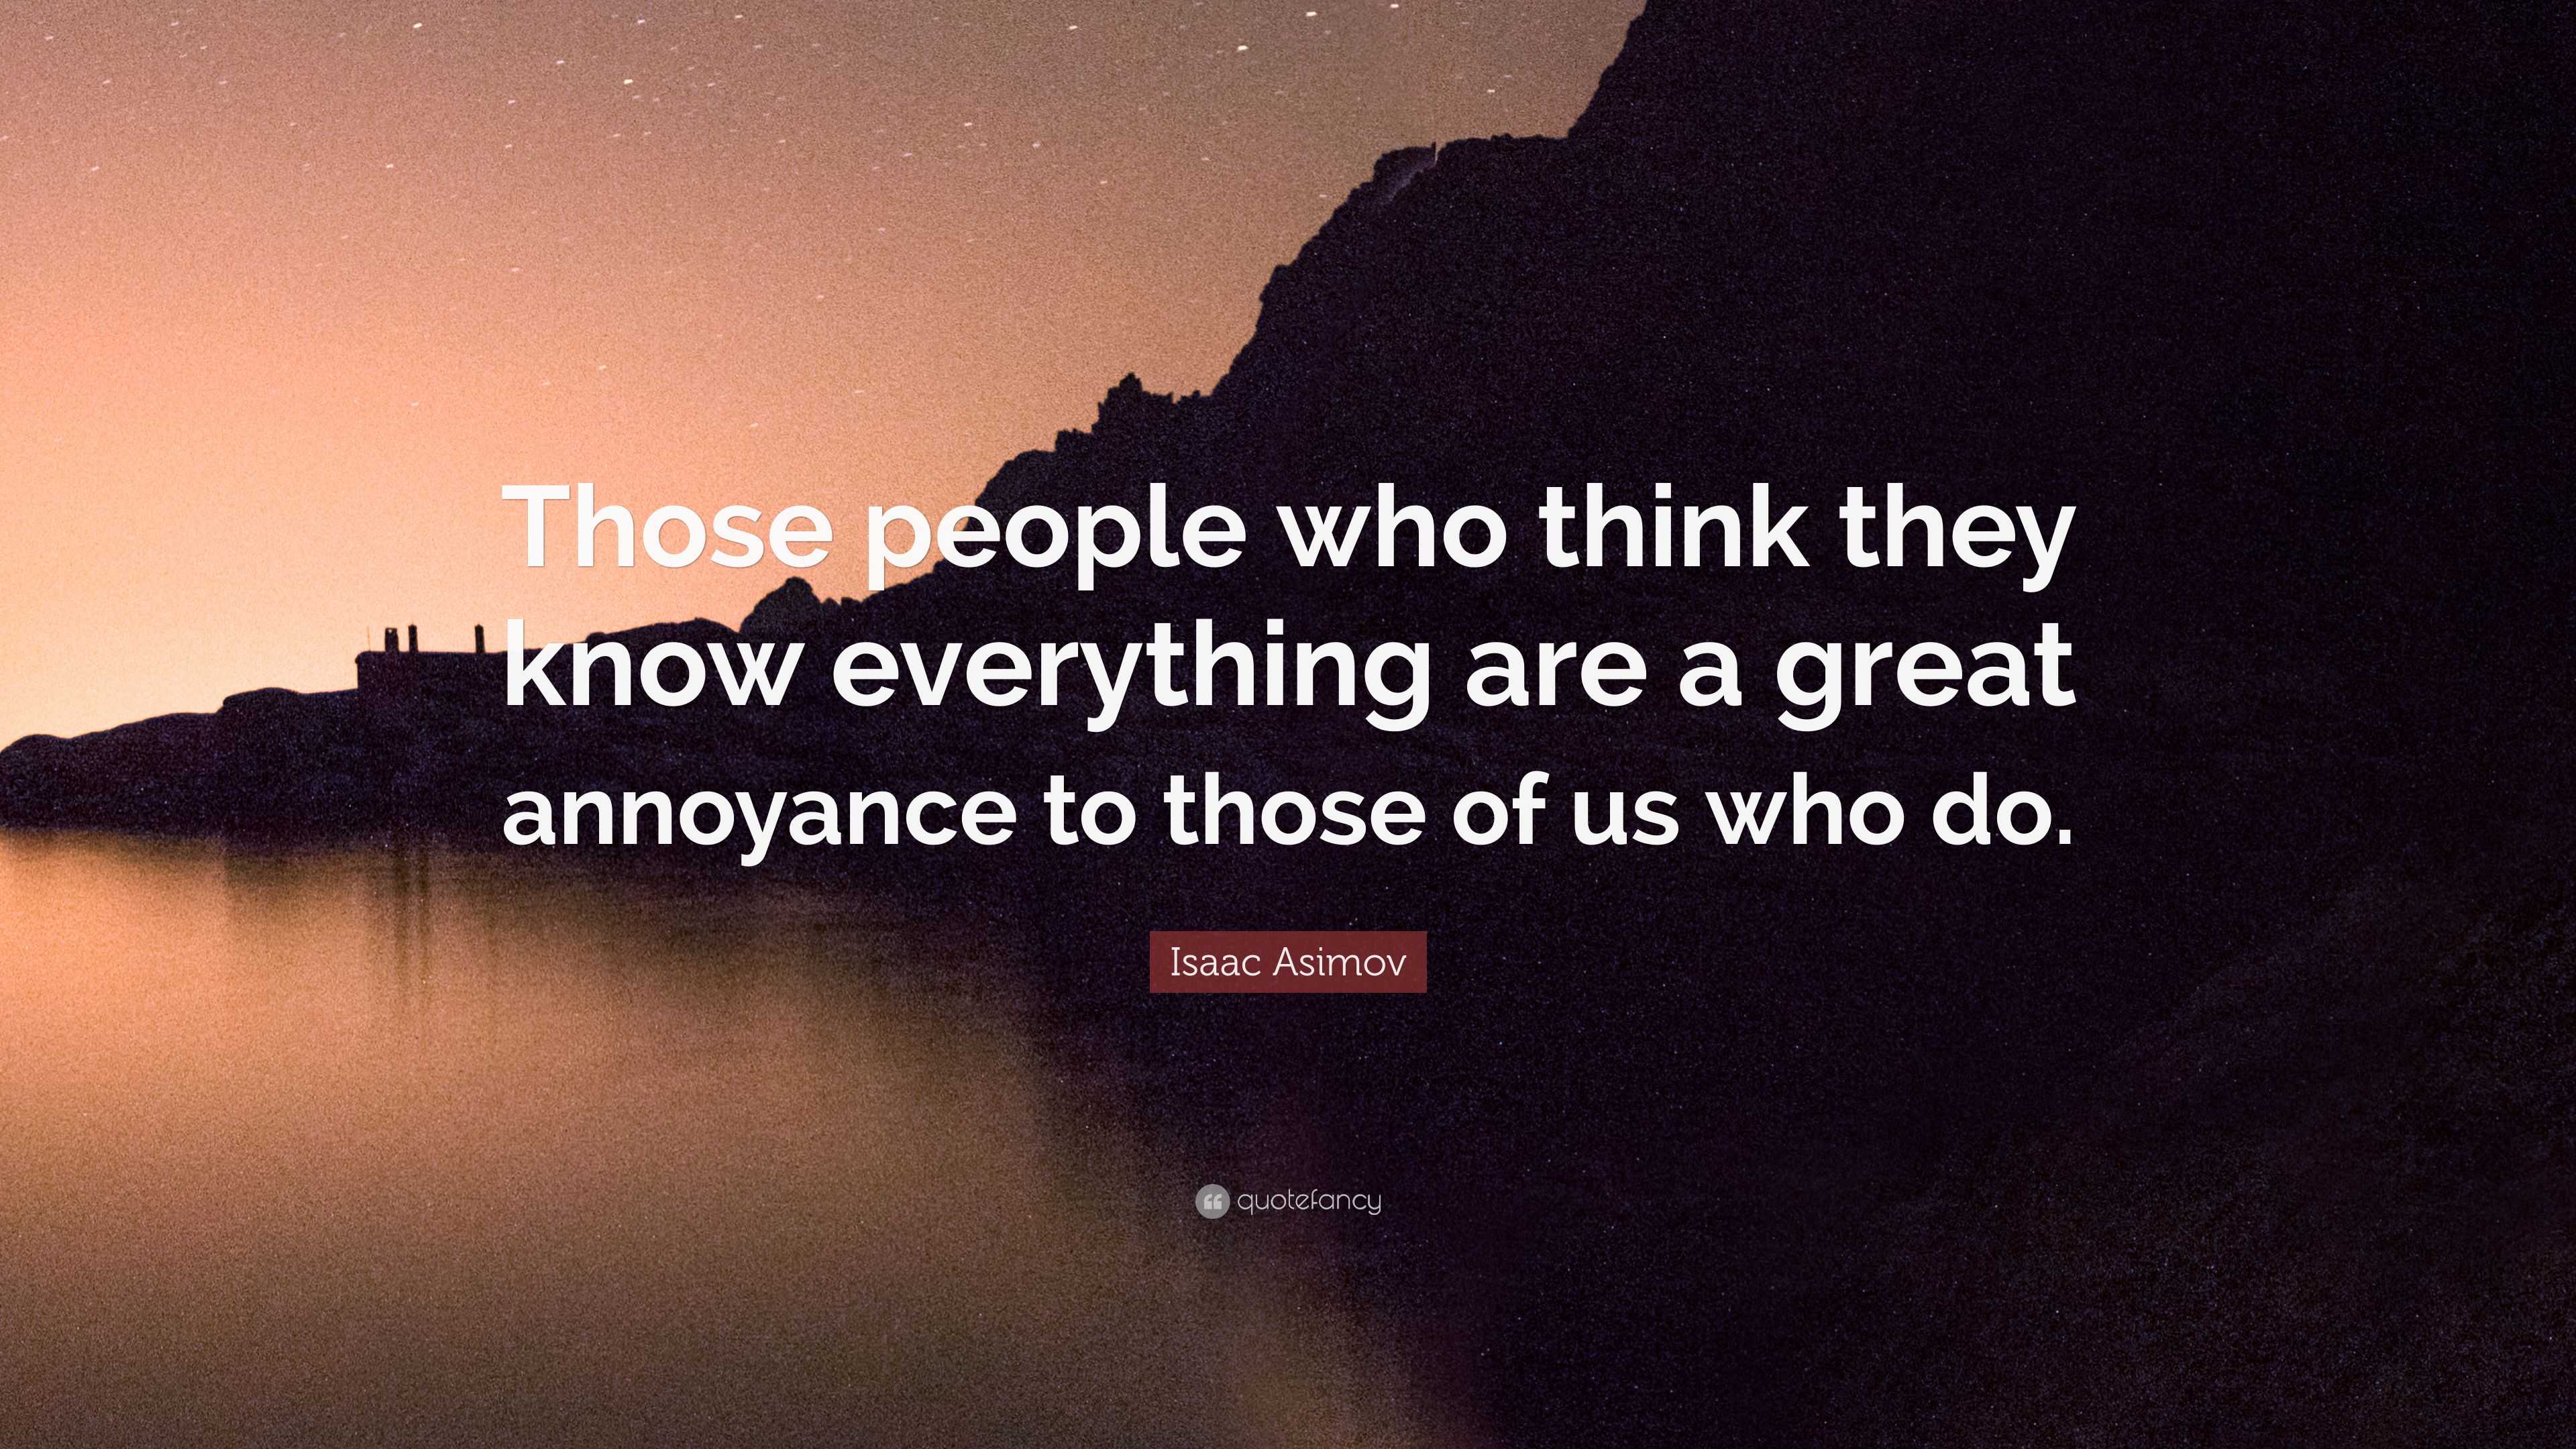 Isaac Asimov Quote “those People Who Think They Know Everything Are A Great Annoyance To Those 1944